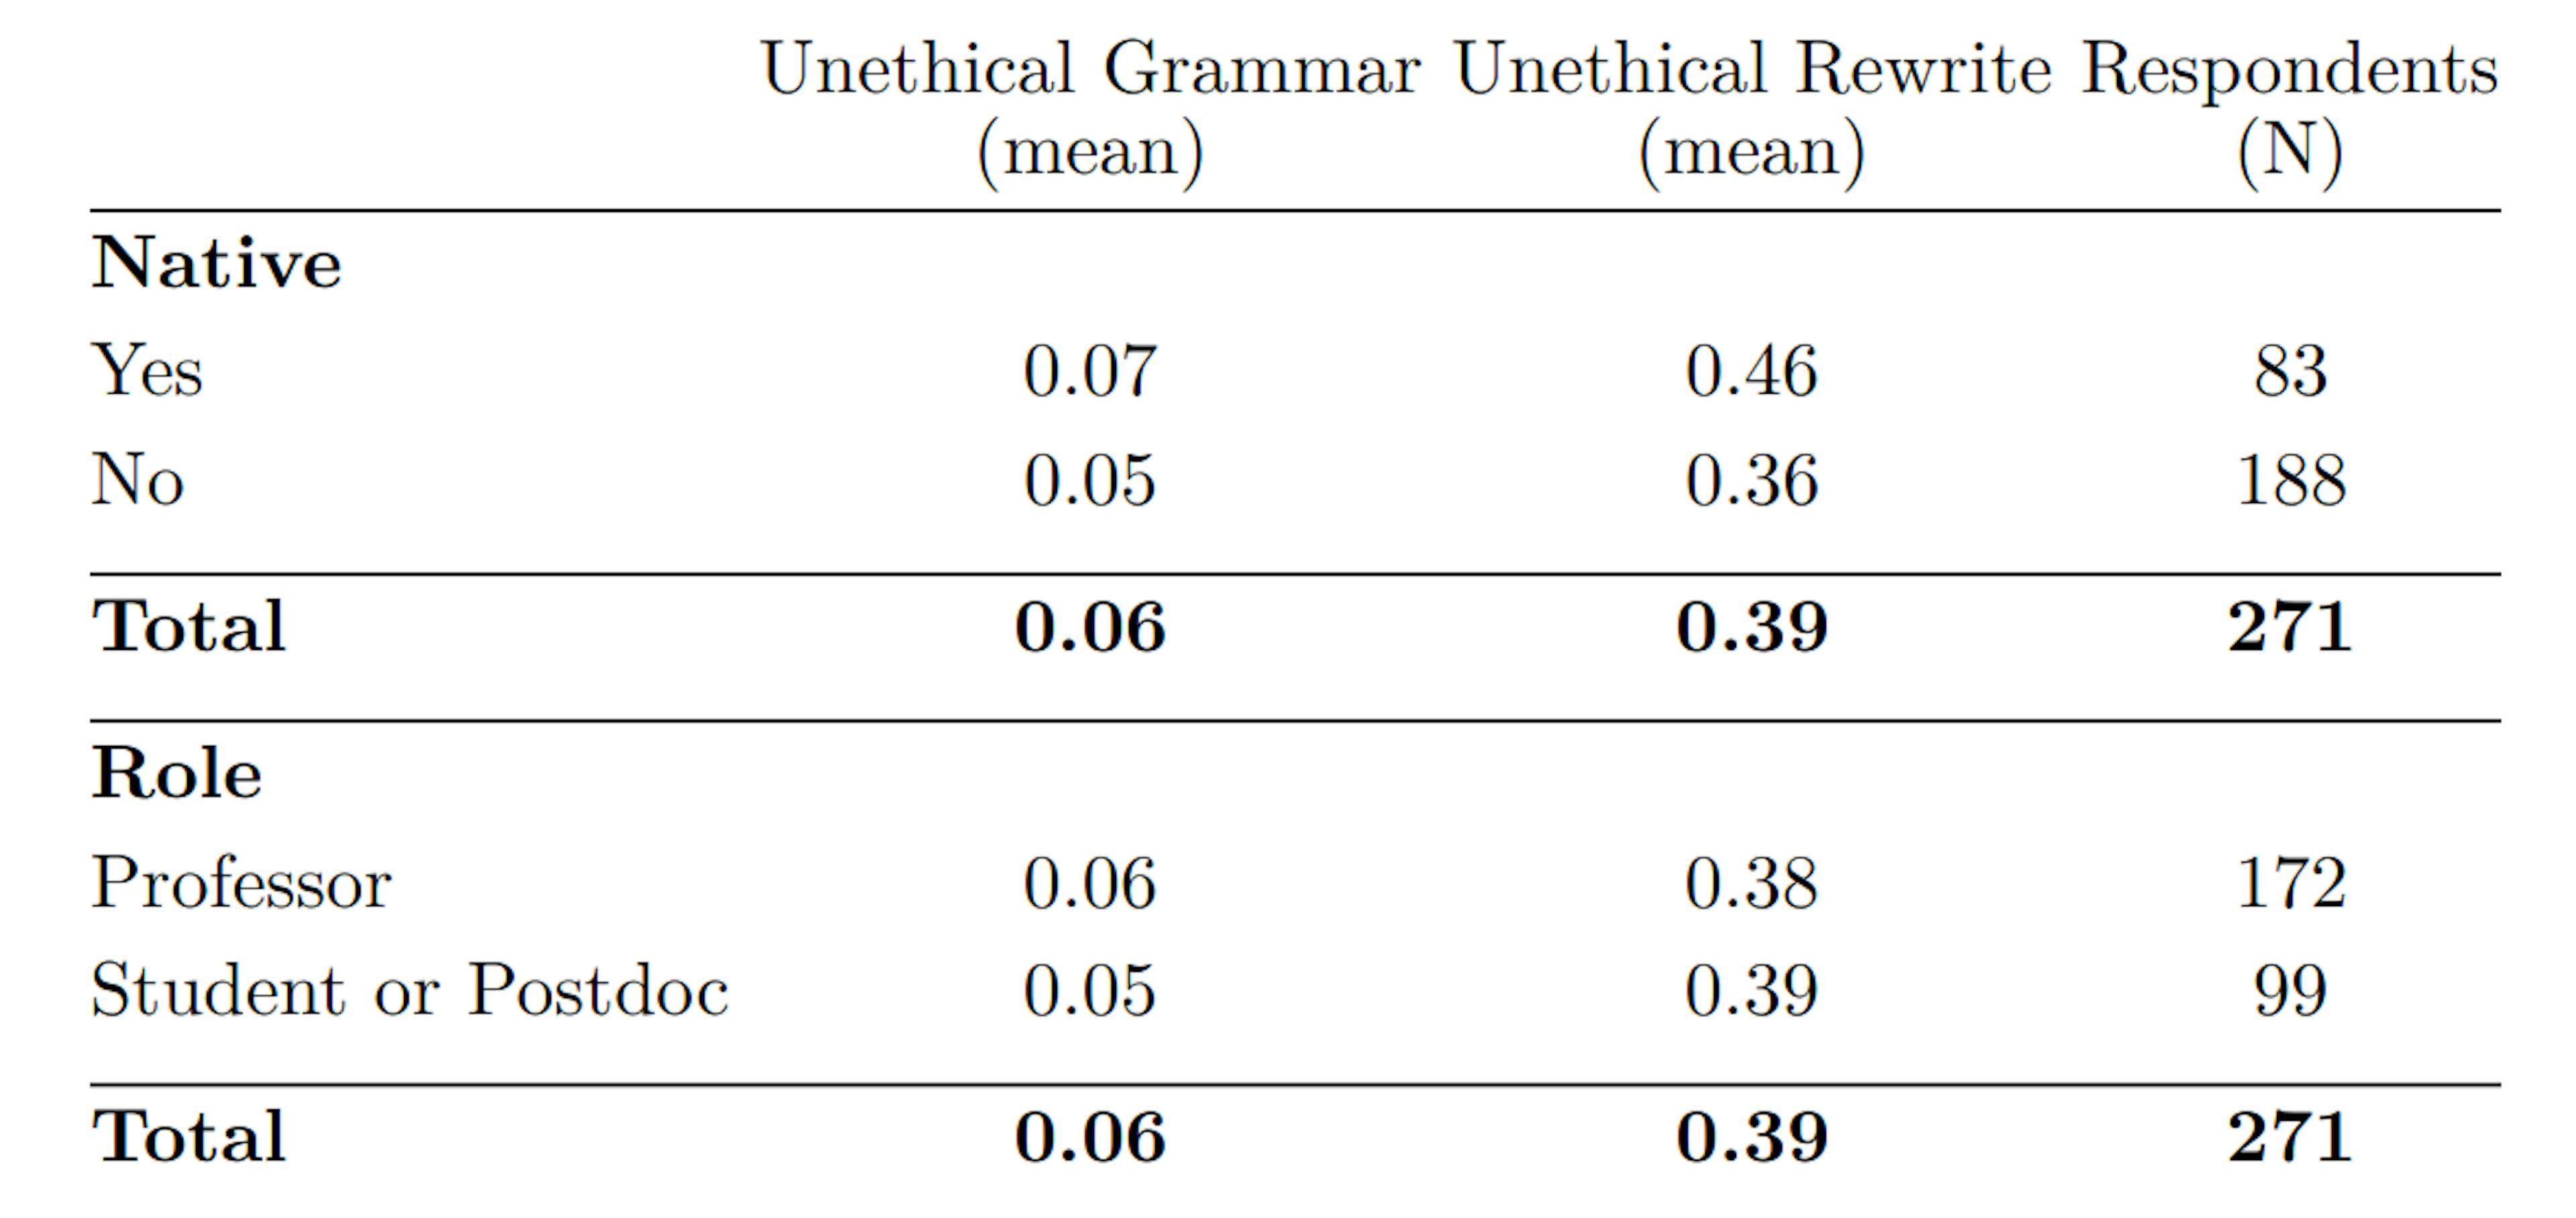 Table 4: The survey averages responses to the questions: “Do you think it is unethical to ask ChatGPT to fix grammar (rewrite text) in a manuscript for an academic journal?” based on one’s role and whether they are a native English speaker.